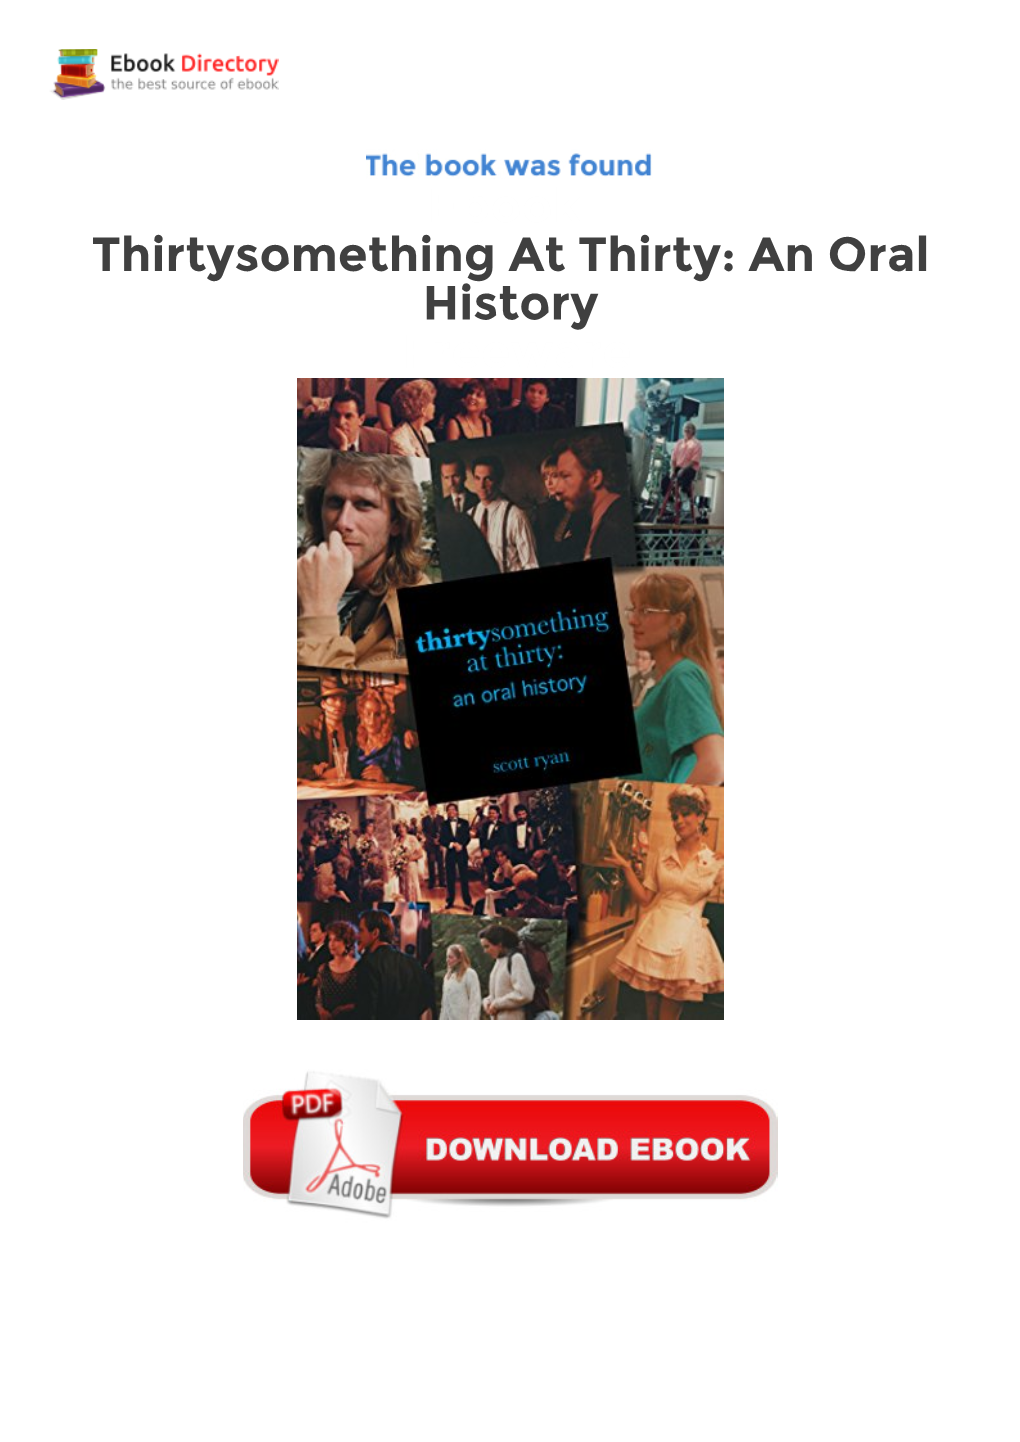 Ebook Thirtysomething at Thirty: an Oral History Freeware